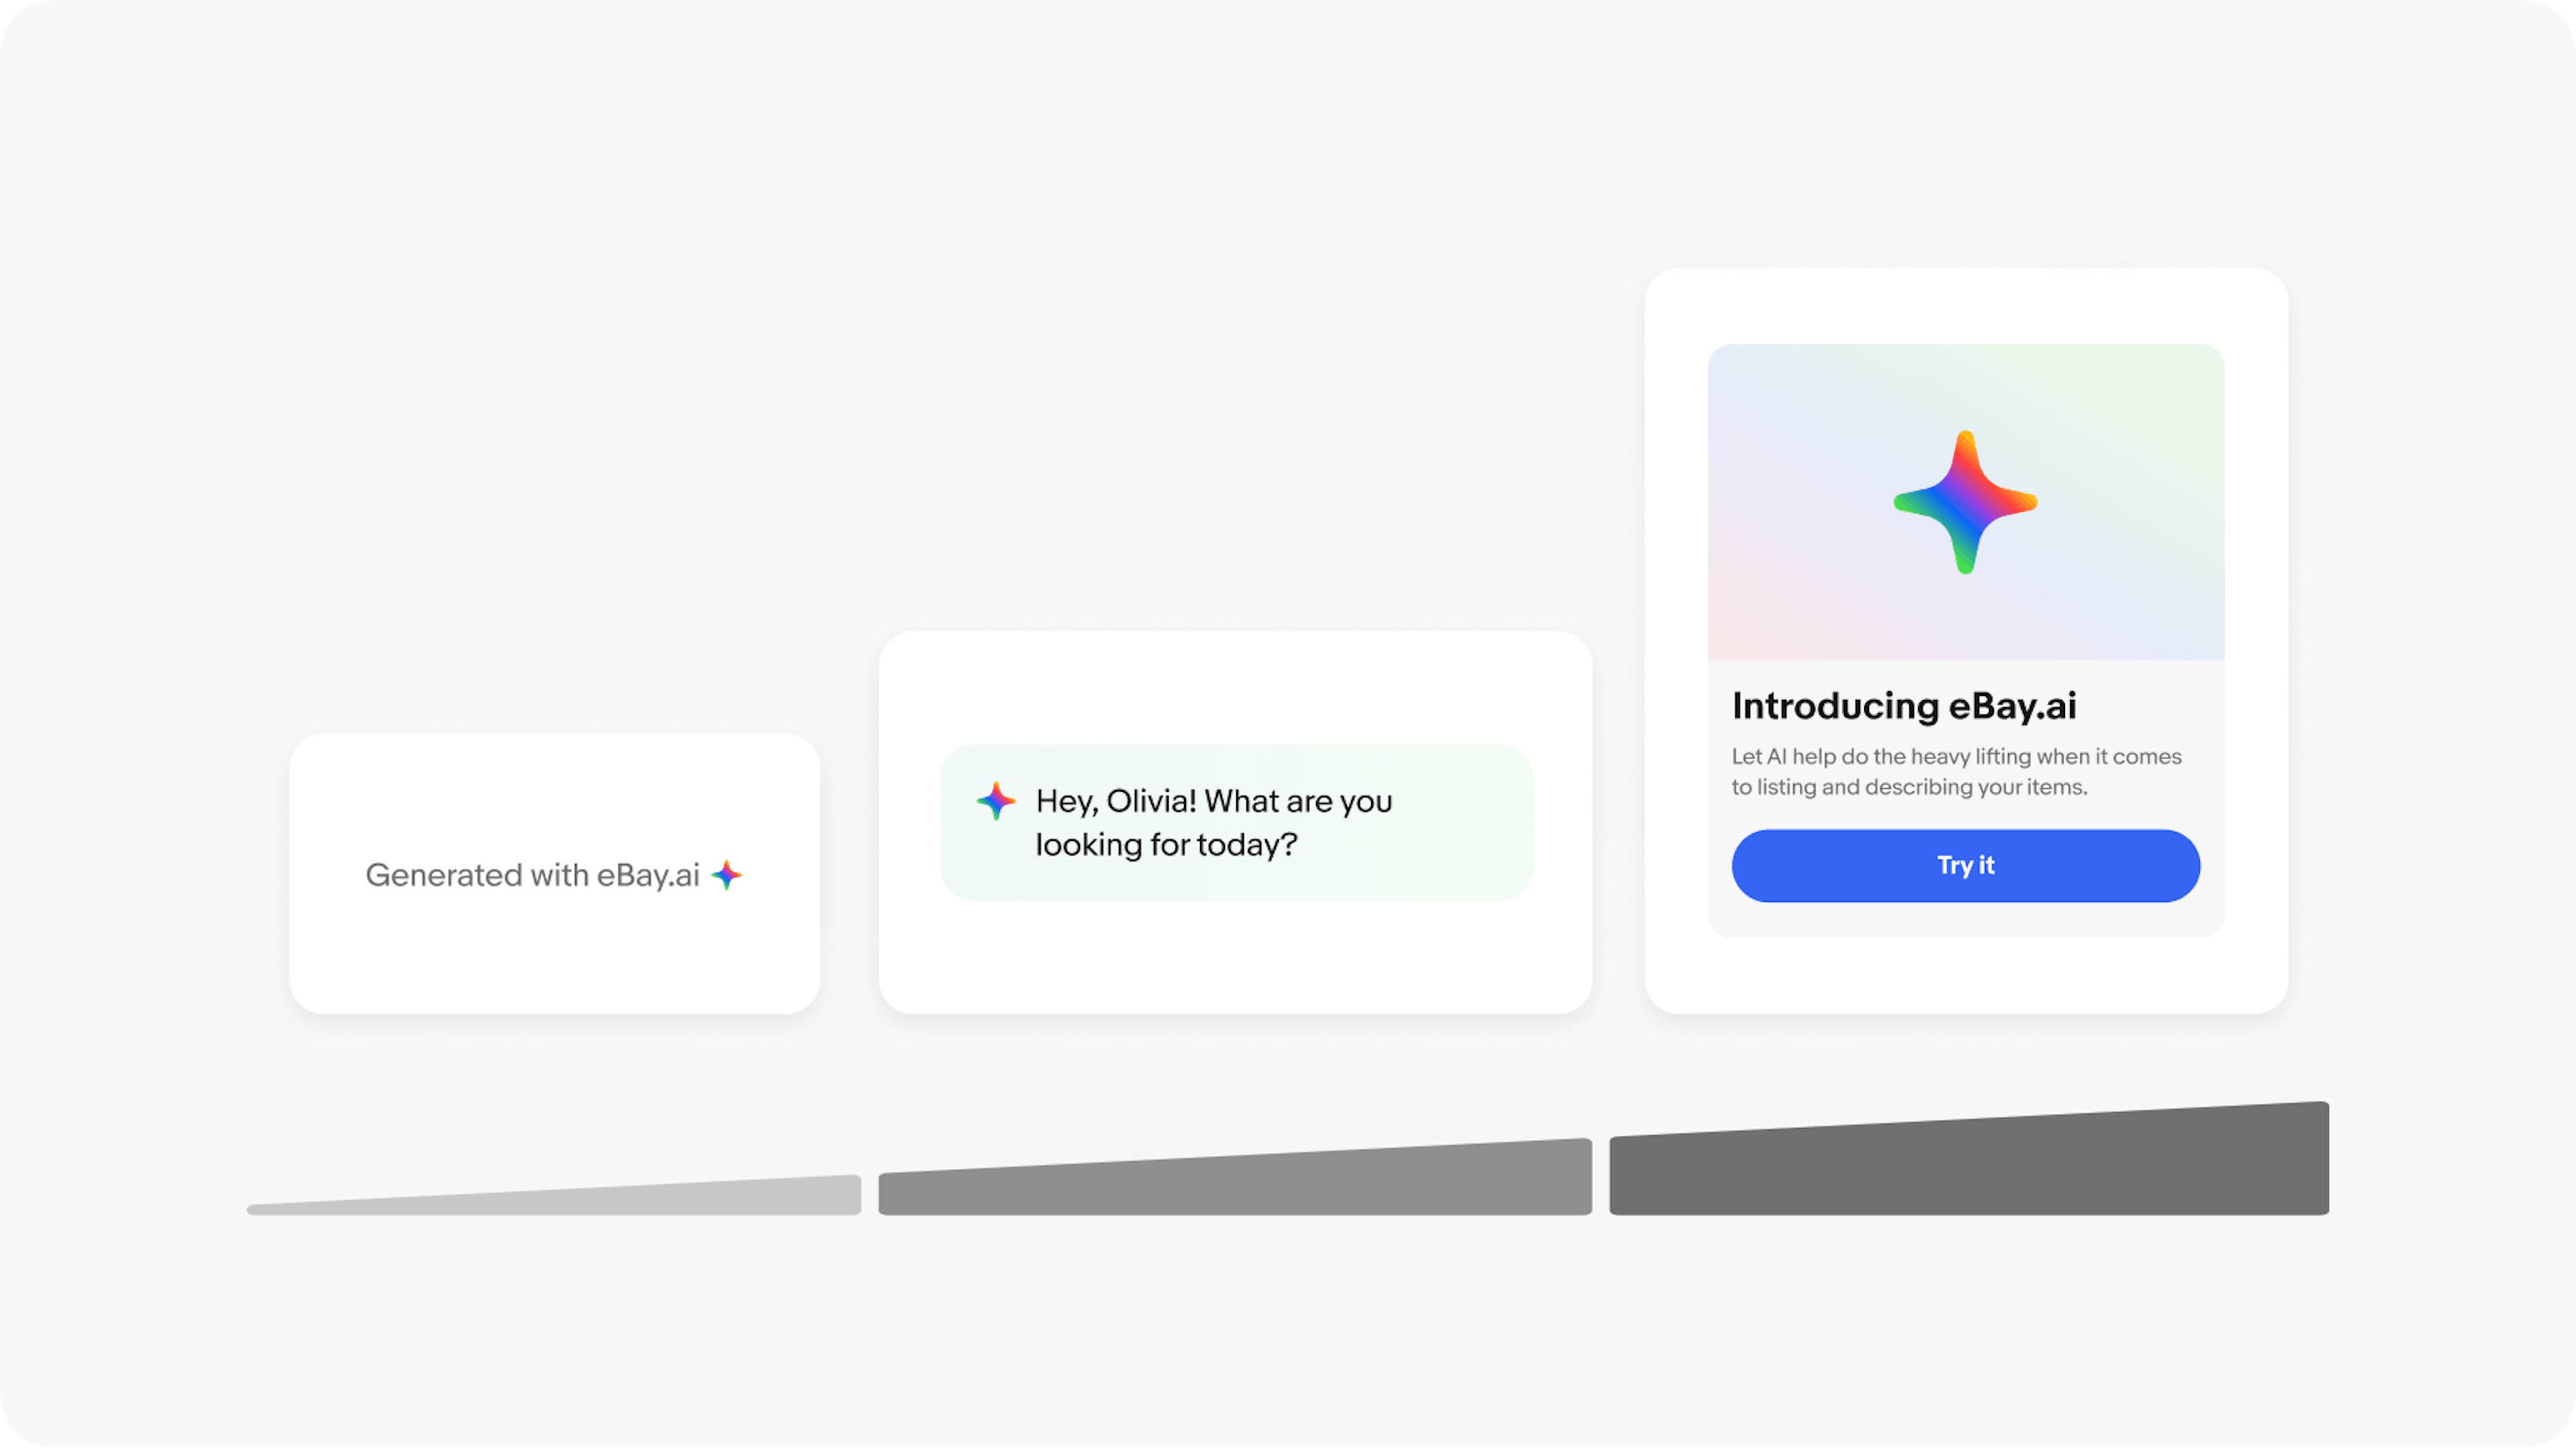 3 UI examples on a scale that shows minimal to prominent from left to right. The most minimal example on the left is a label with the AI icon after it that says, “Generated with eBay.ai”. The second example is an assistant module that has the icon with the text string, “Hey Olivia! What are you looking for today?” on a subtle gradient background. The third, and most visually prominent, example is an education card with gray background and an image above with large full spectrum AI icon and a subtle gradient background behind it.